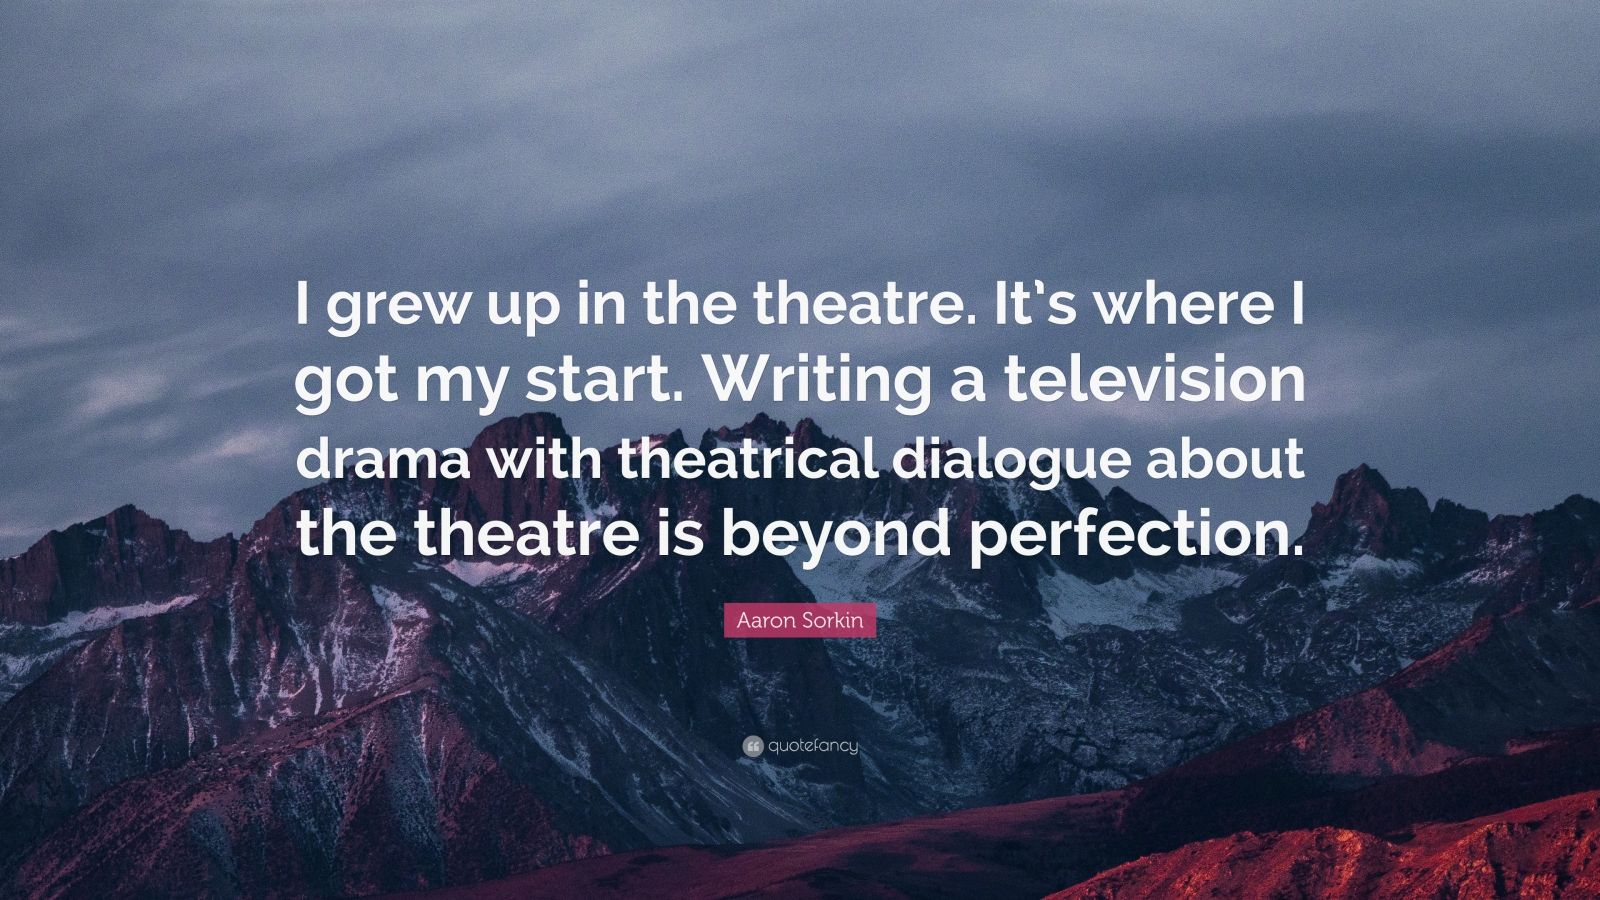 Aaron Sorkin Quote: “I grew up in the theatre. It’s where I got my ...